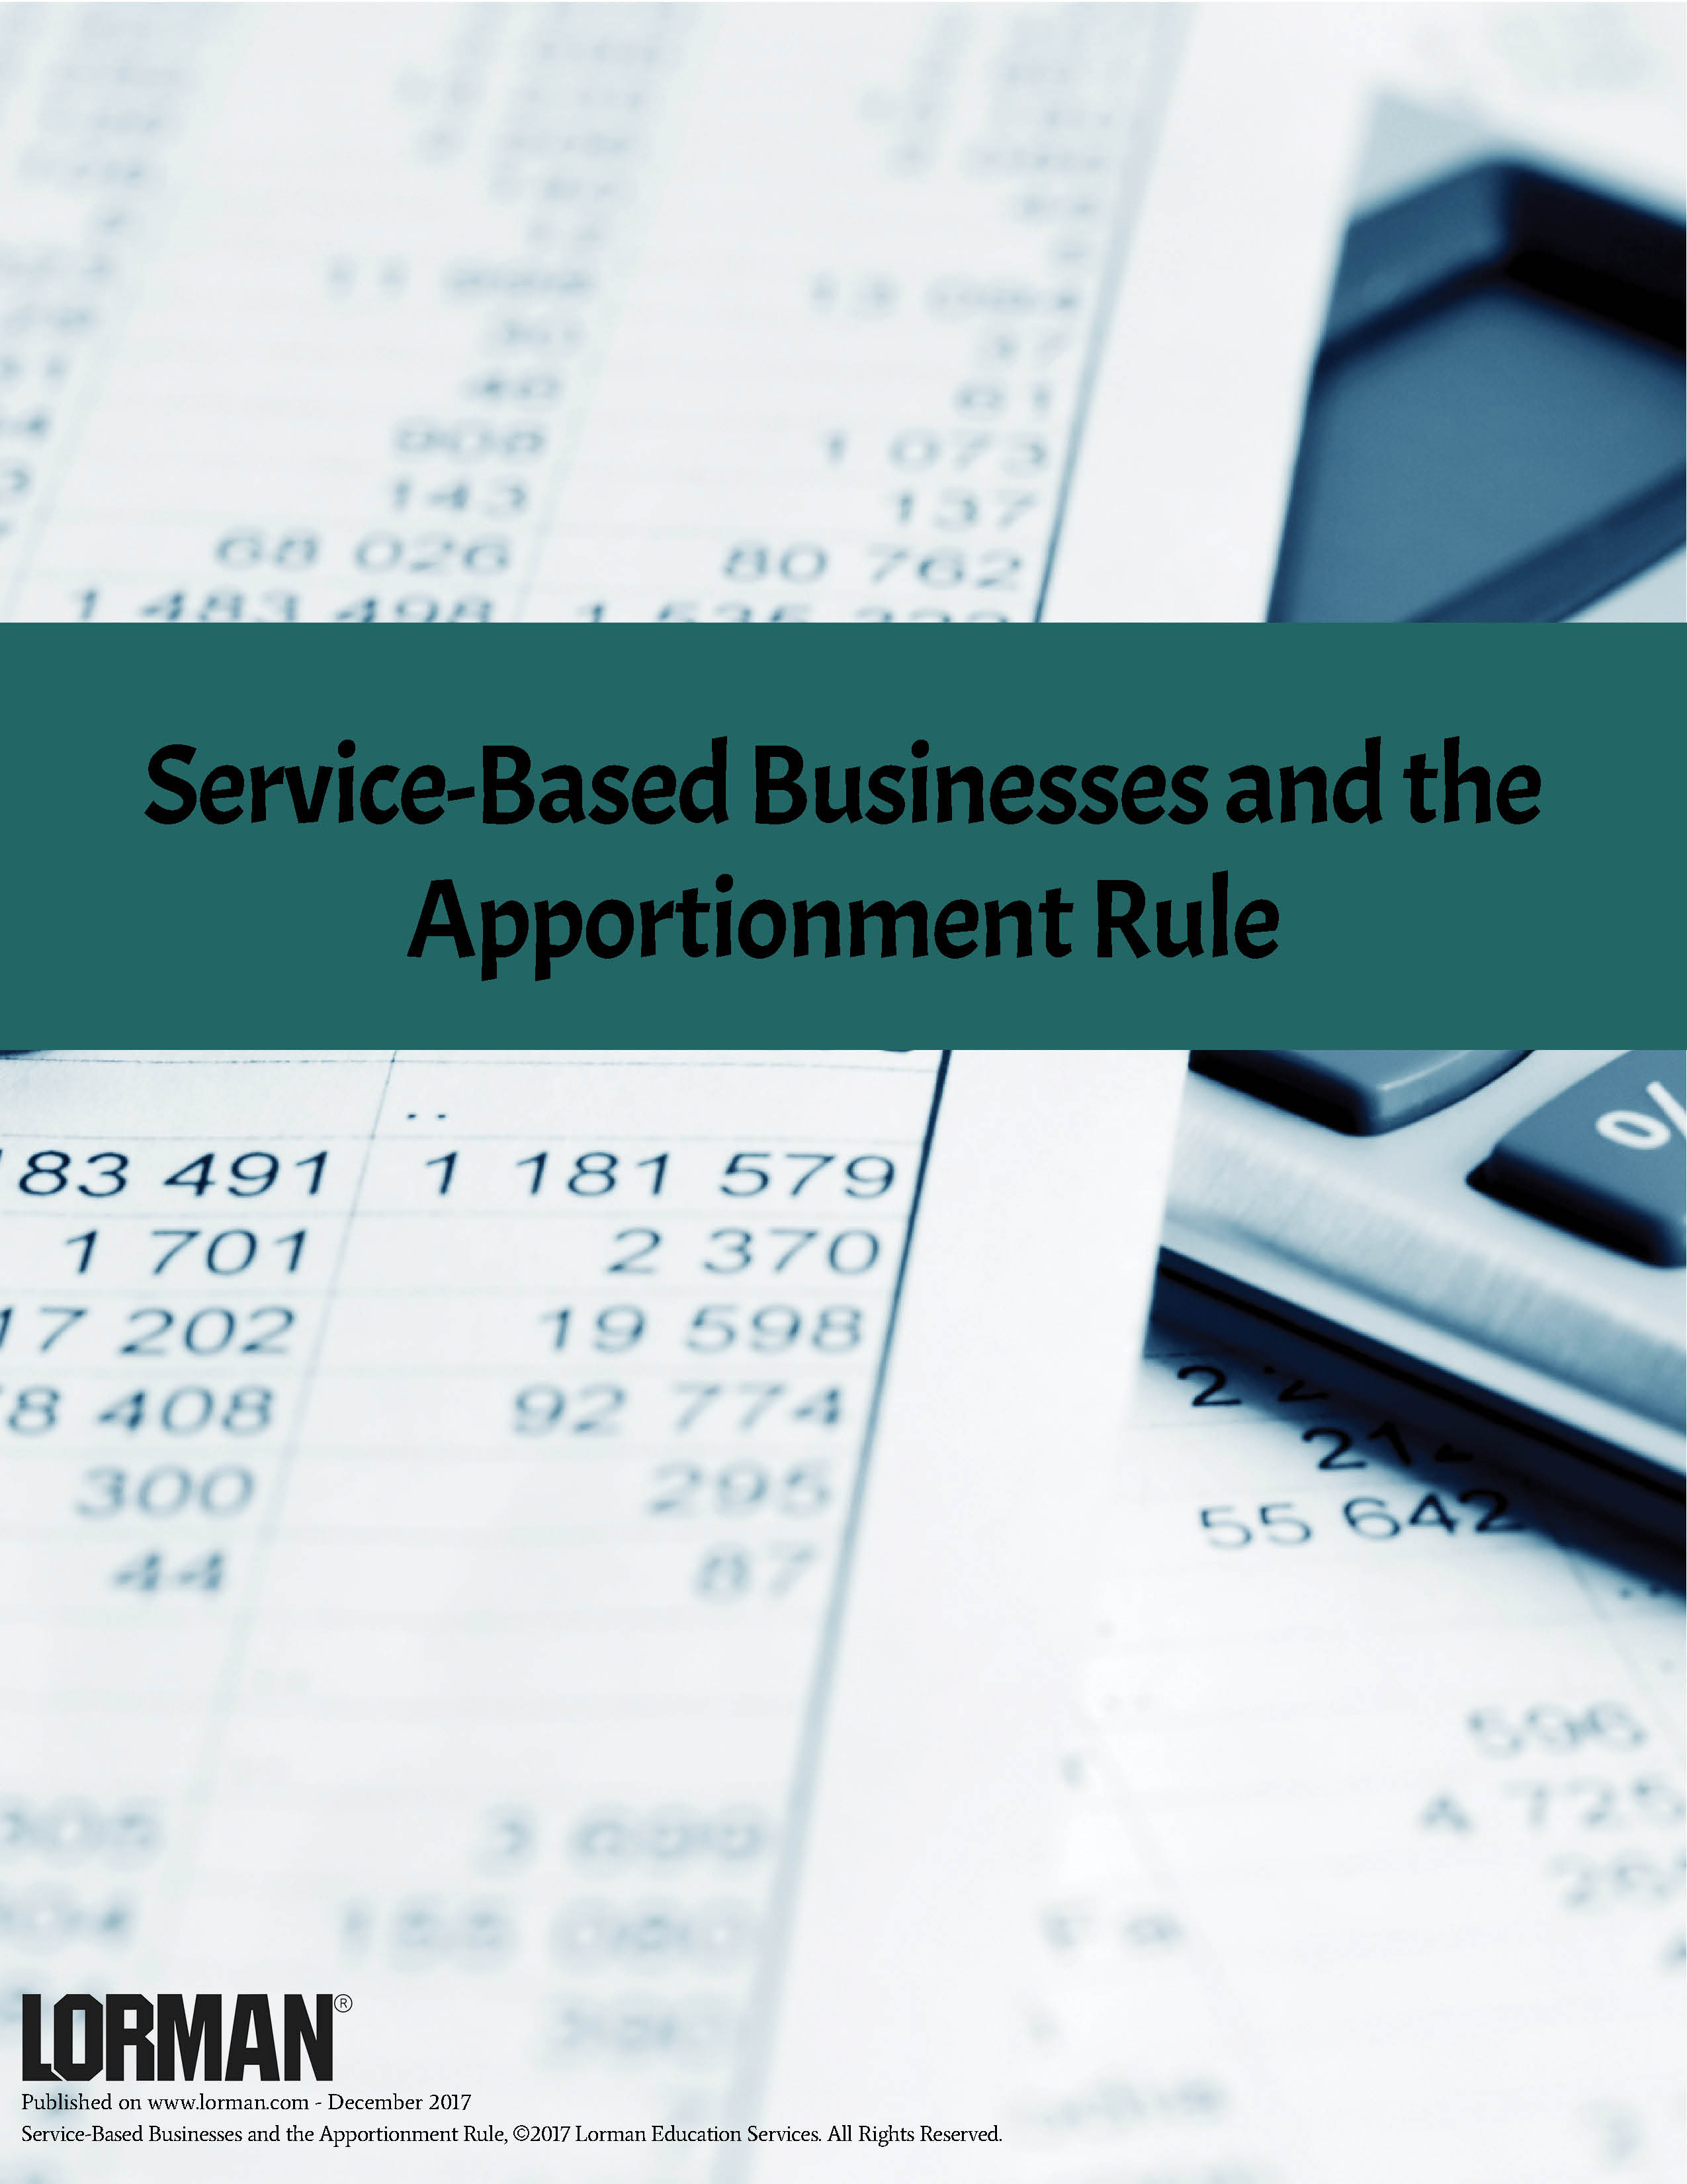 Service-Based Businesses and the Apportionment Rule